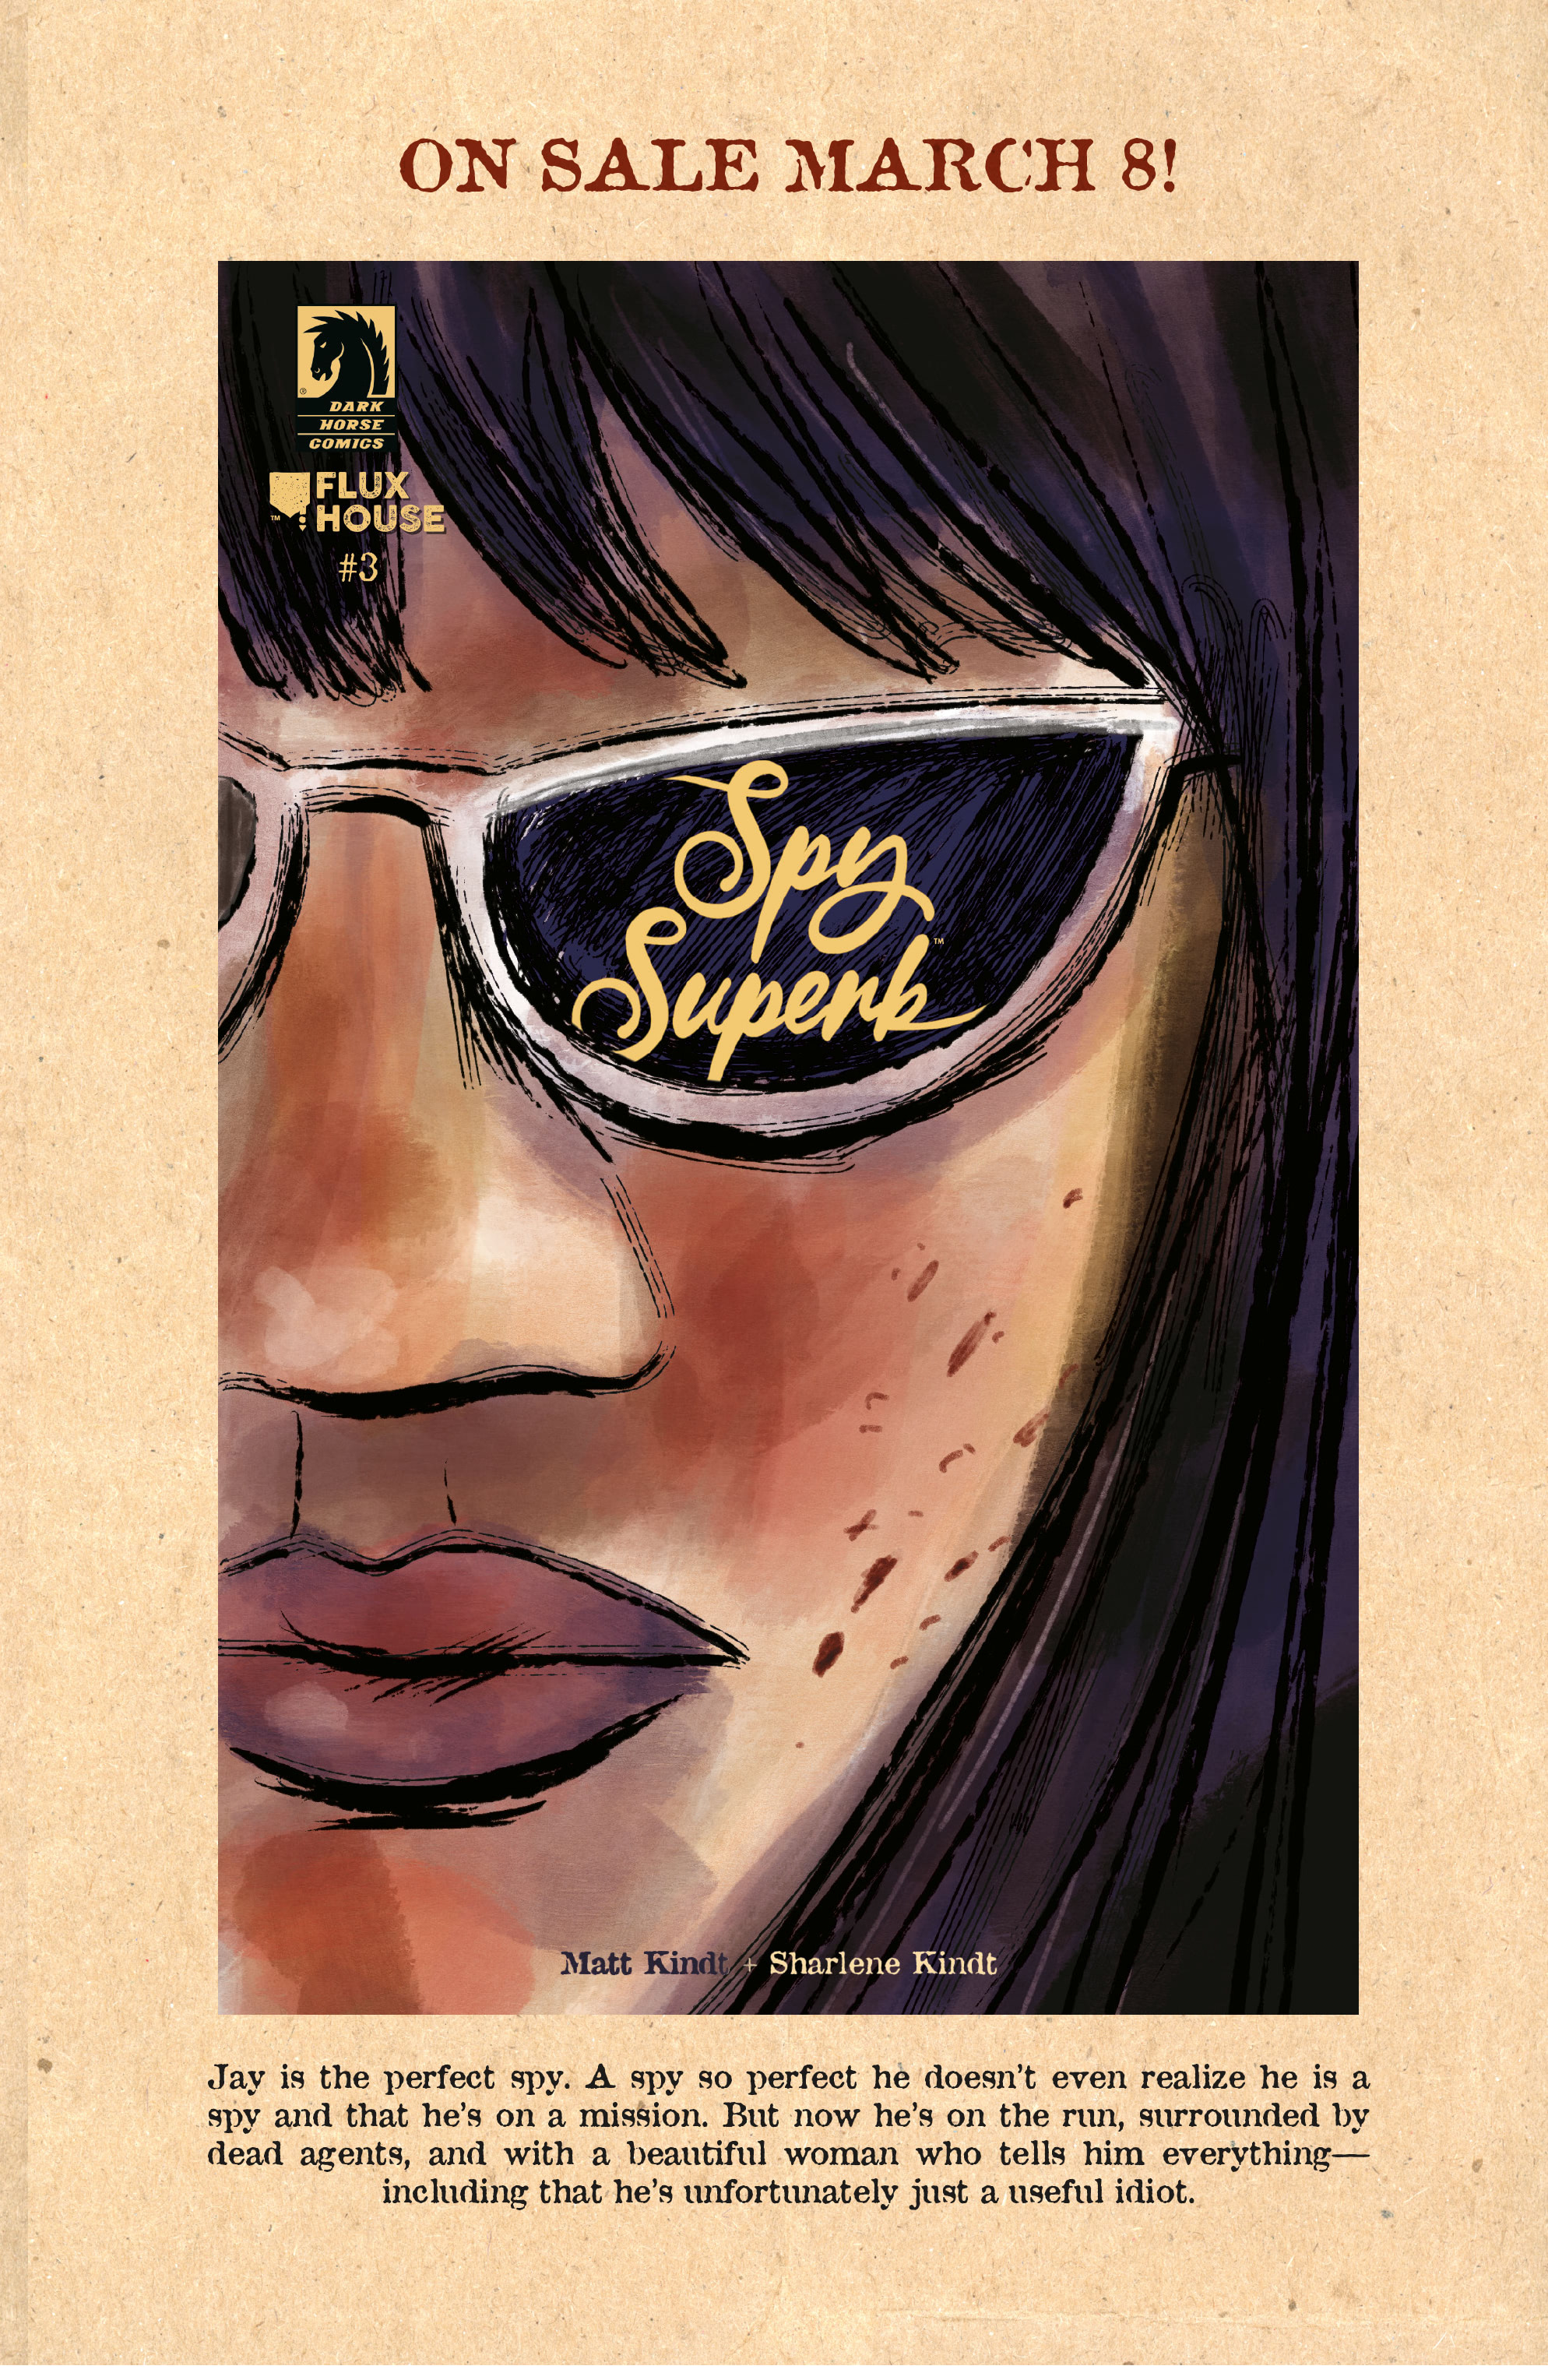 Read online Spy Superb comic -  Issue #2 - 52